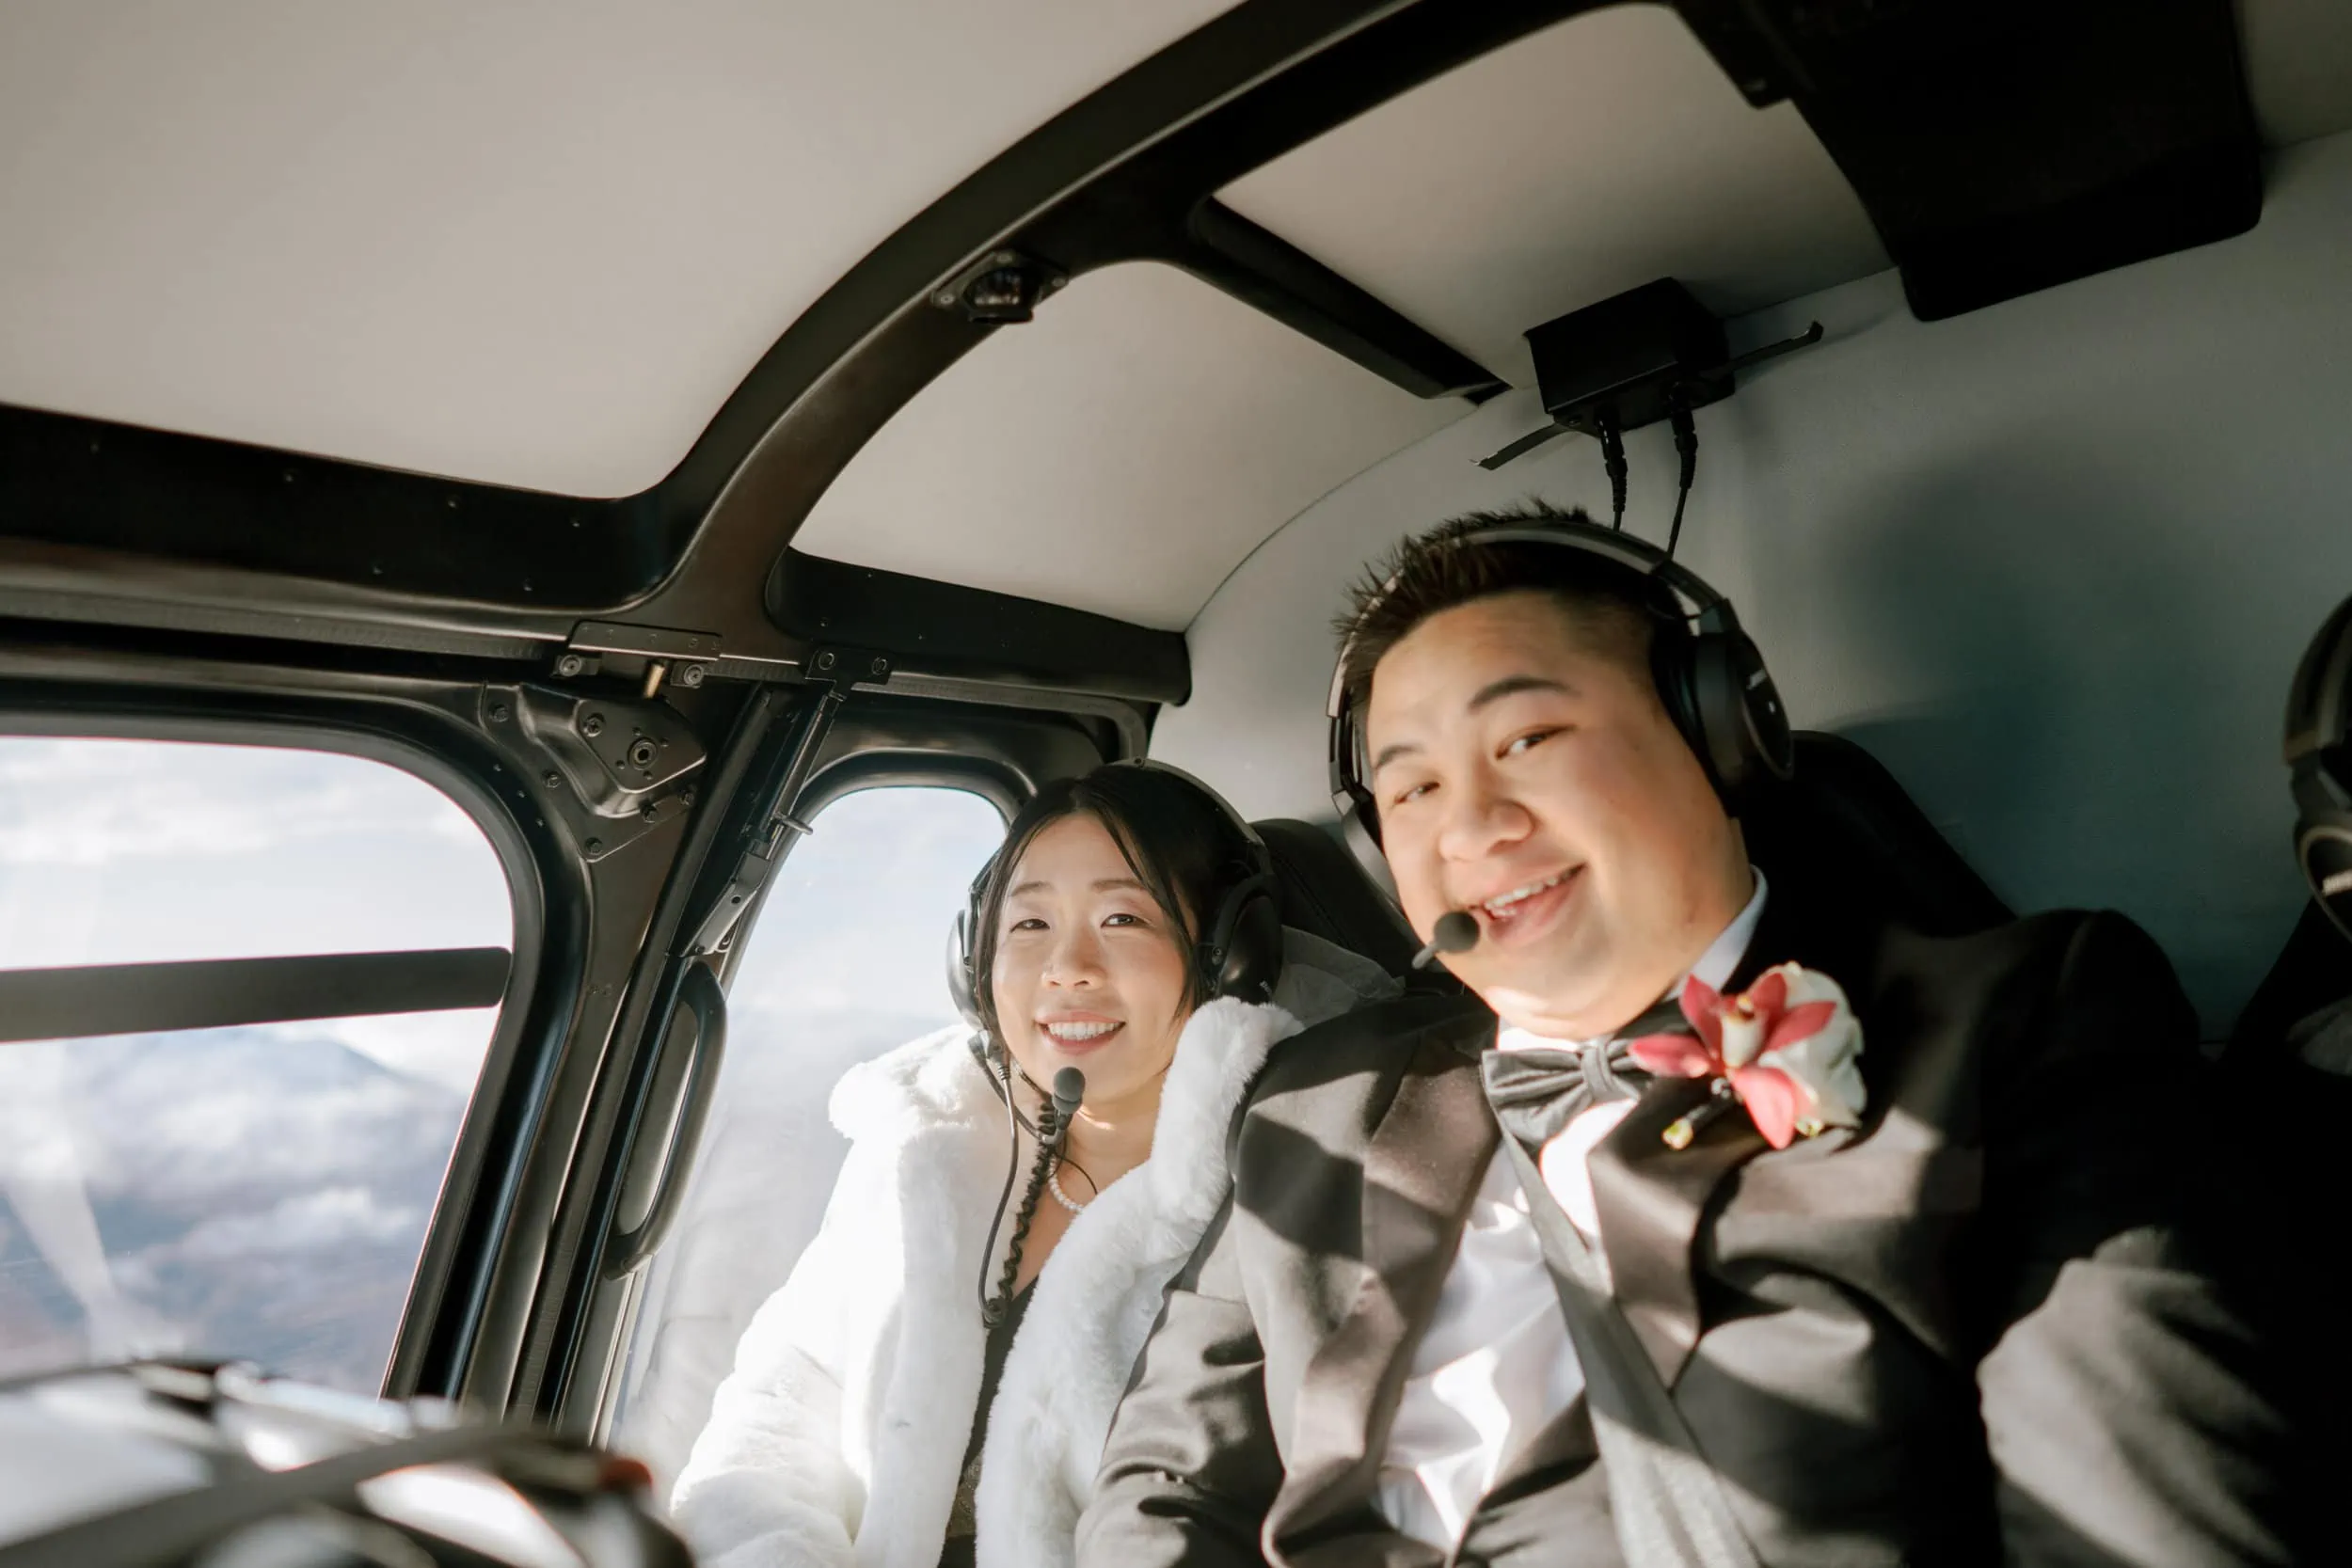 Queenstown New Zealand Elopement Wedding Photographer - Lam and Wendy's Kamana Lakehouse Wedding featuring a spectacular Heli Shoot.